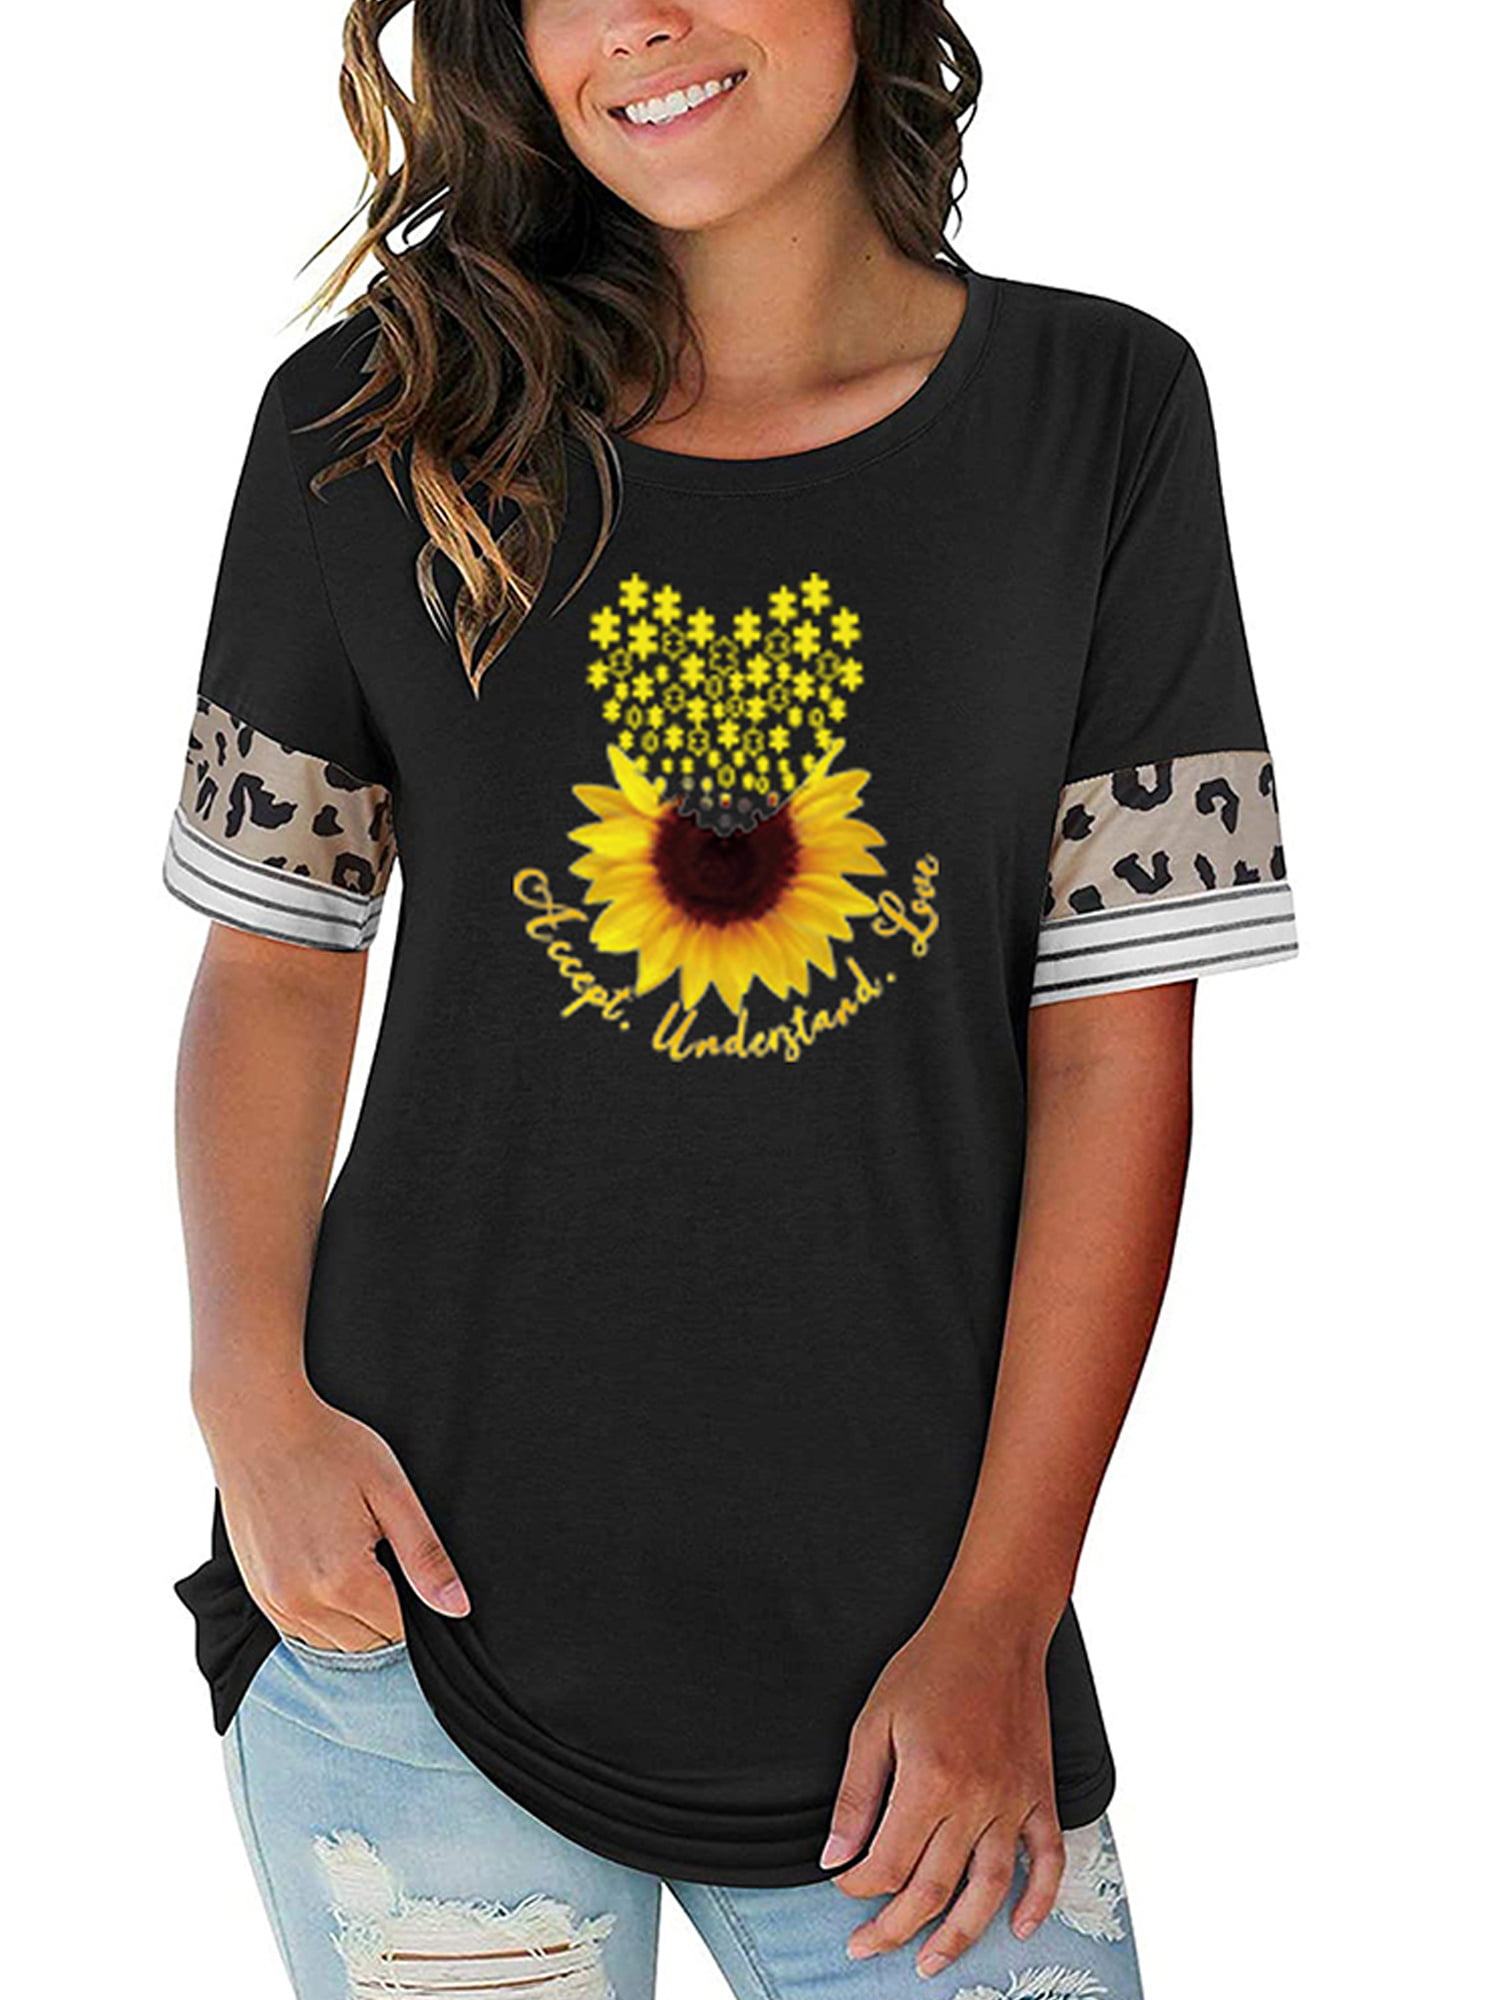 Plus Size Summer Sunflower T-Shirt Gray Ncek Round Neck T-Shirt Blouses Ladies Casual Short Sleeve Top Womens Large Size Short Sleeves U 